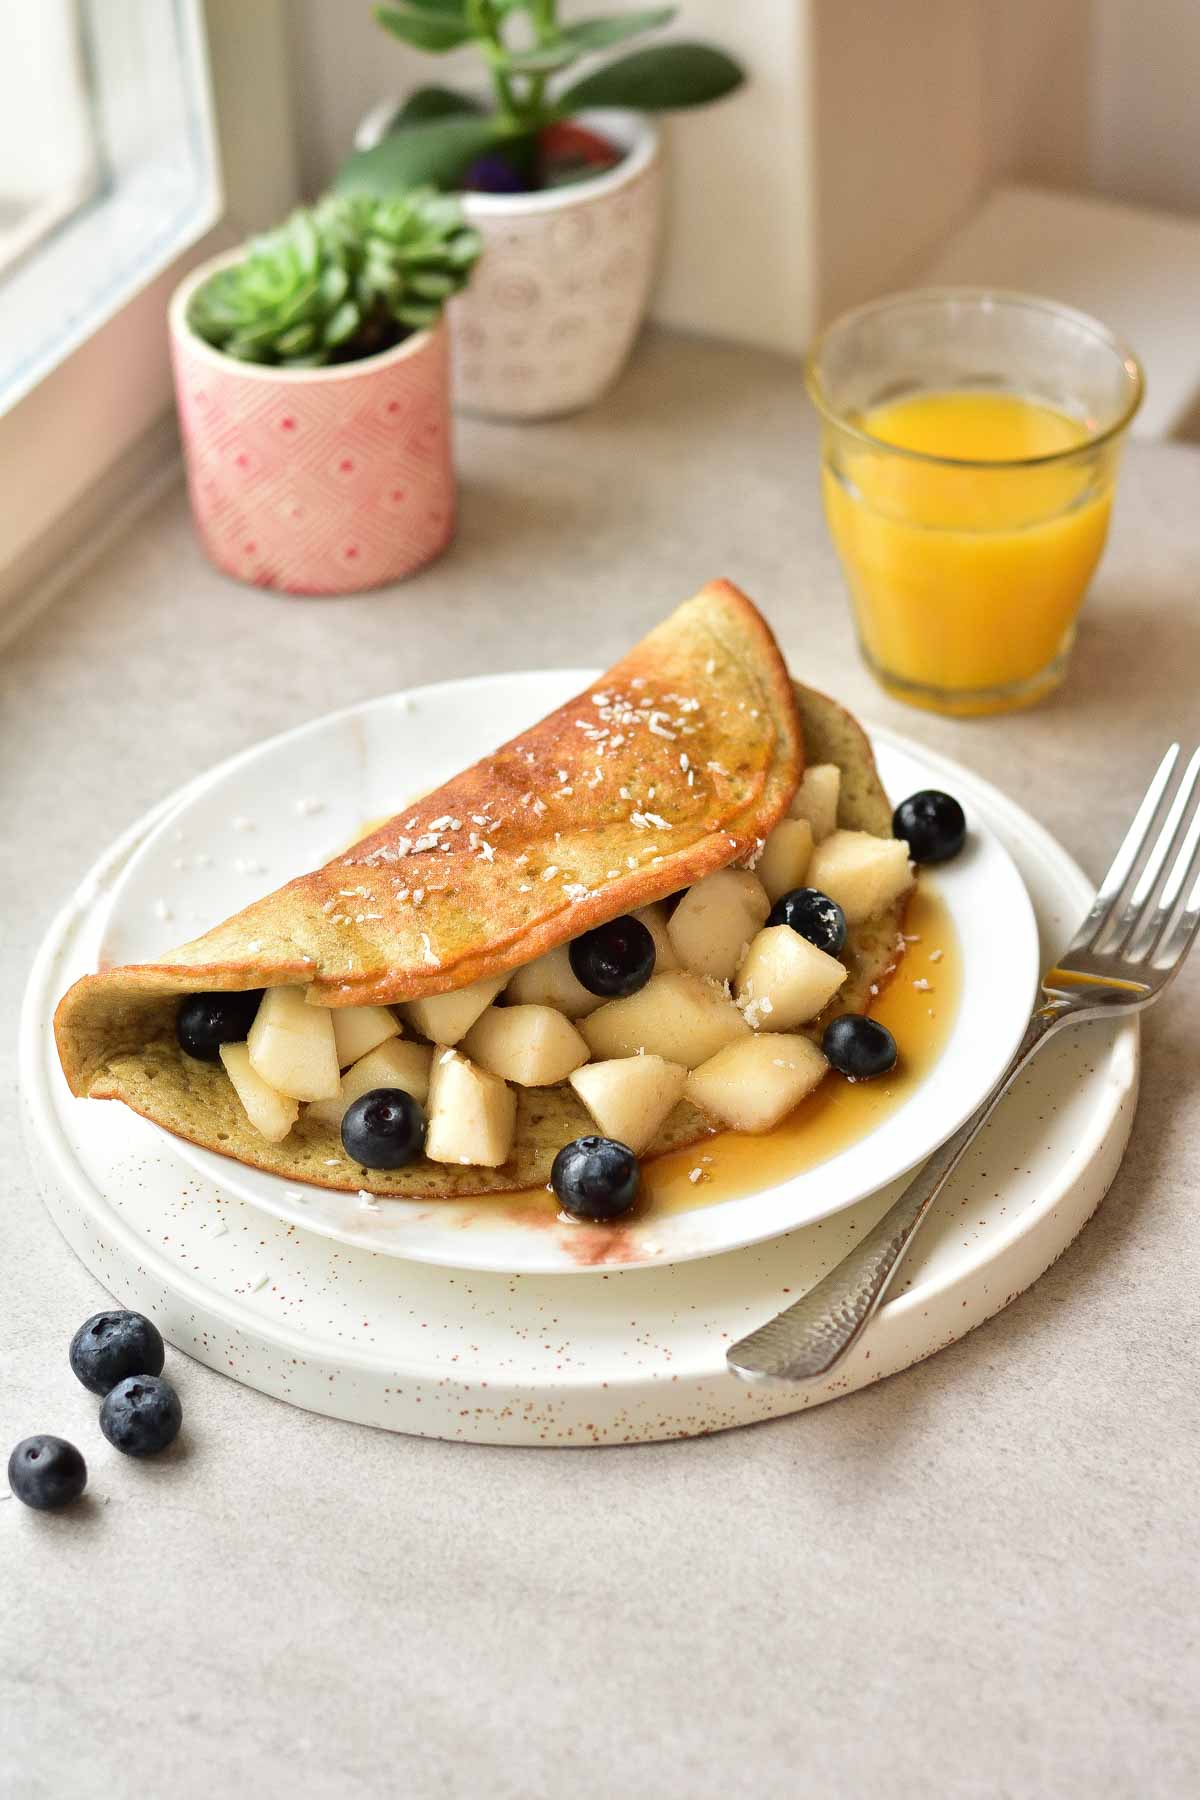 Banana omlette with pear and blueberries on a white plate, orange juice and plants in the background.